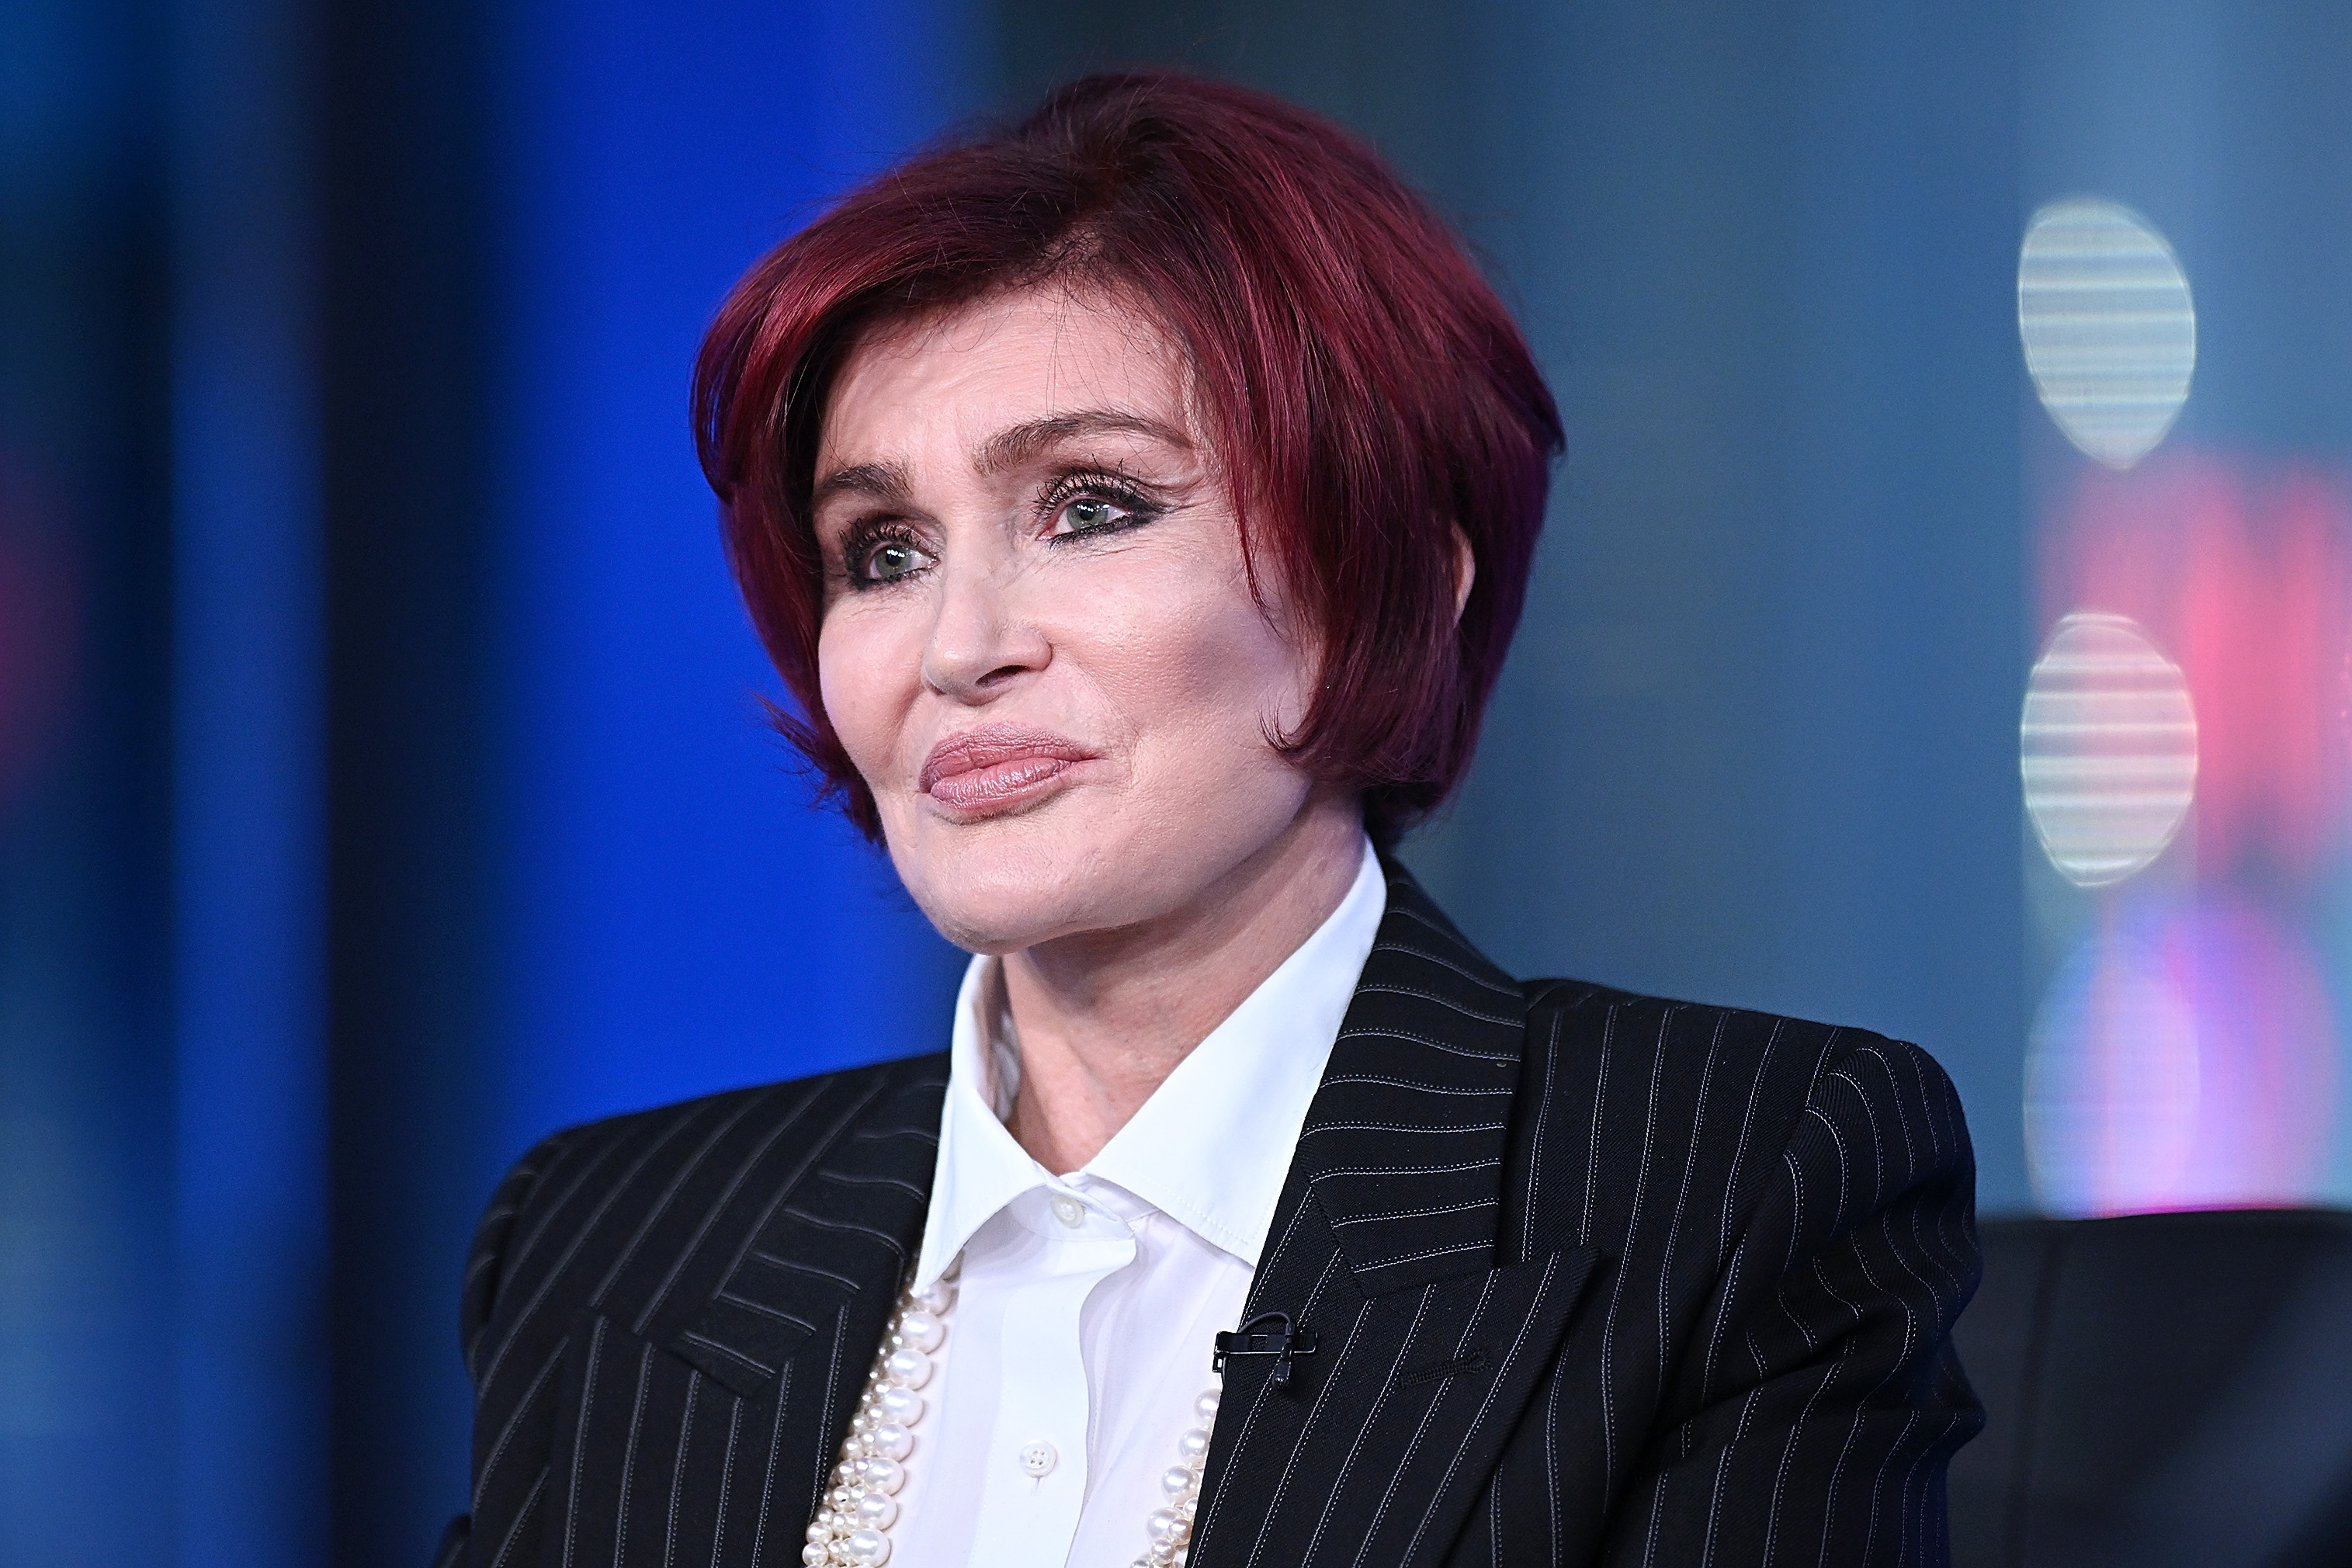 Sharon Osbourne speaking at FOX News Channel Studios in New York City on September 27, 2022 | Source: Getty Images